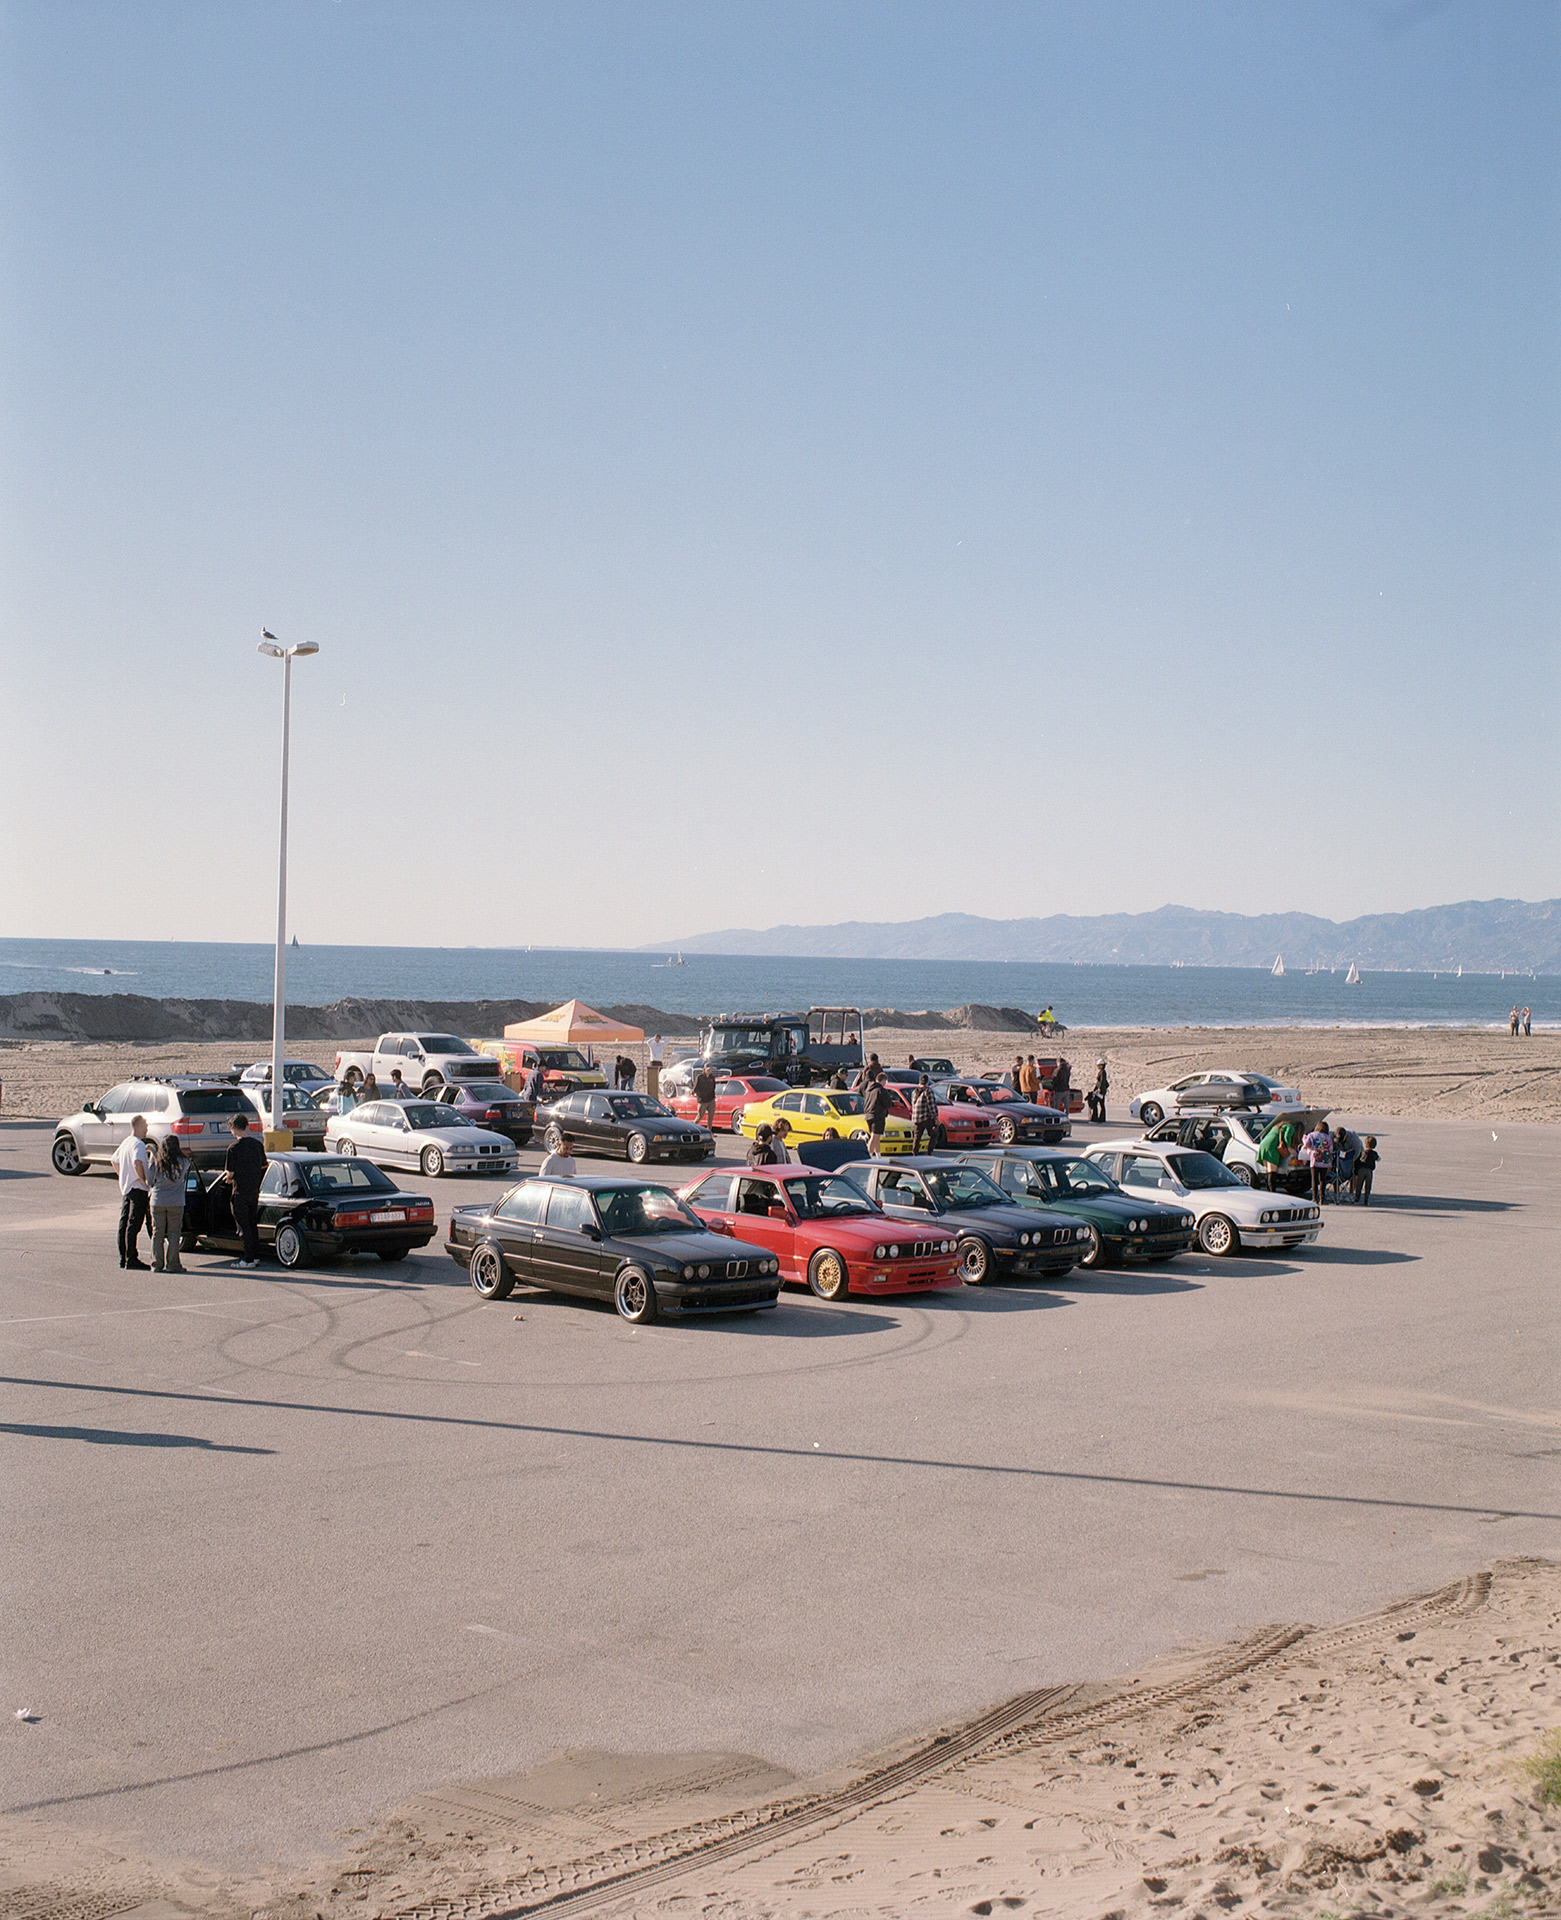 Cars parked in a parking lot right by the beach on a sunny day.